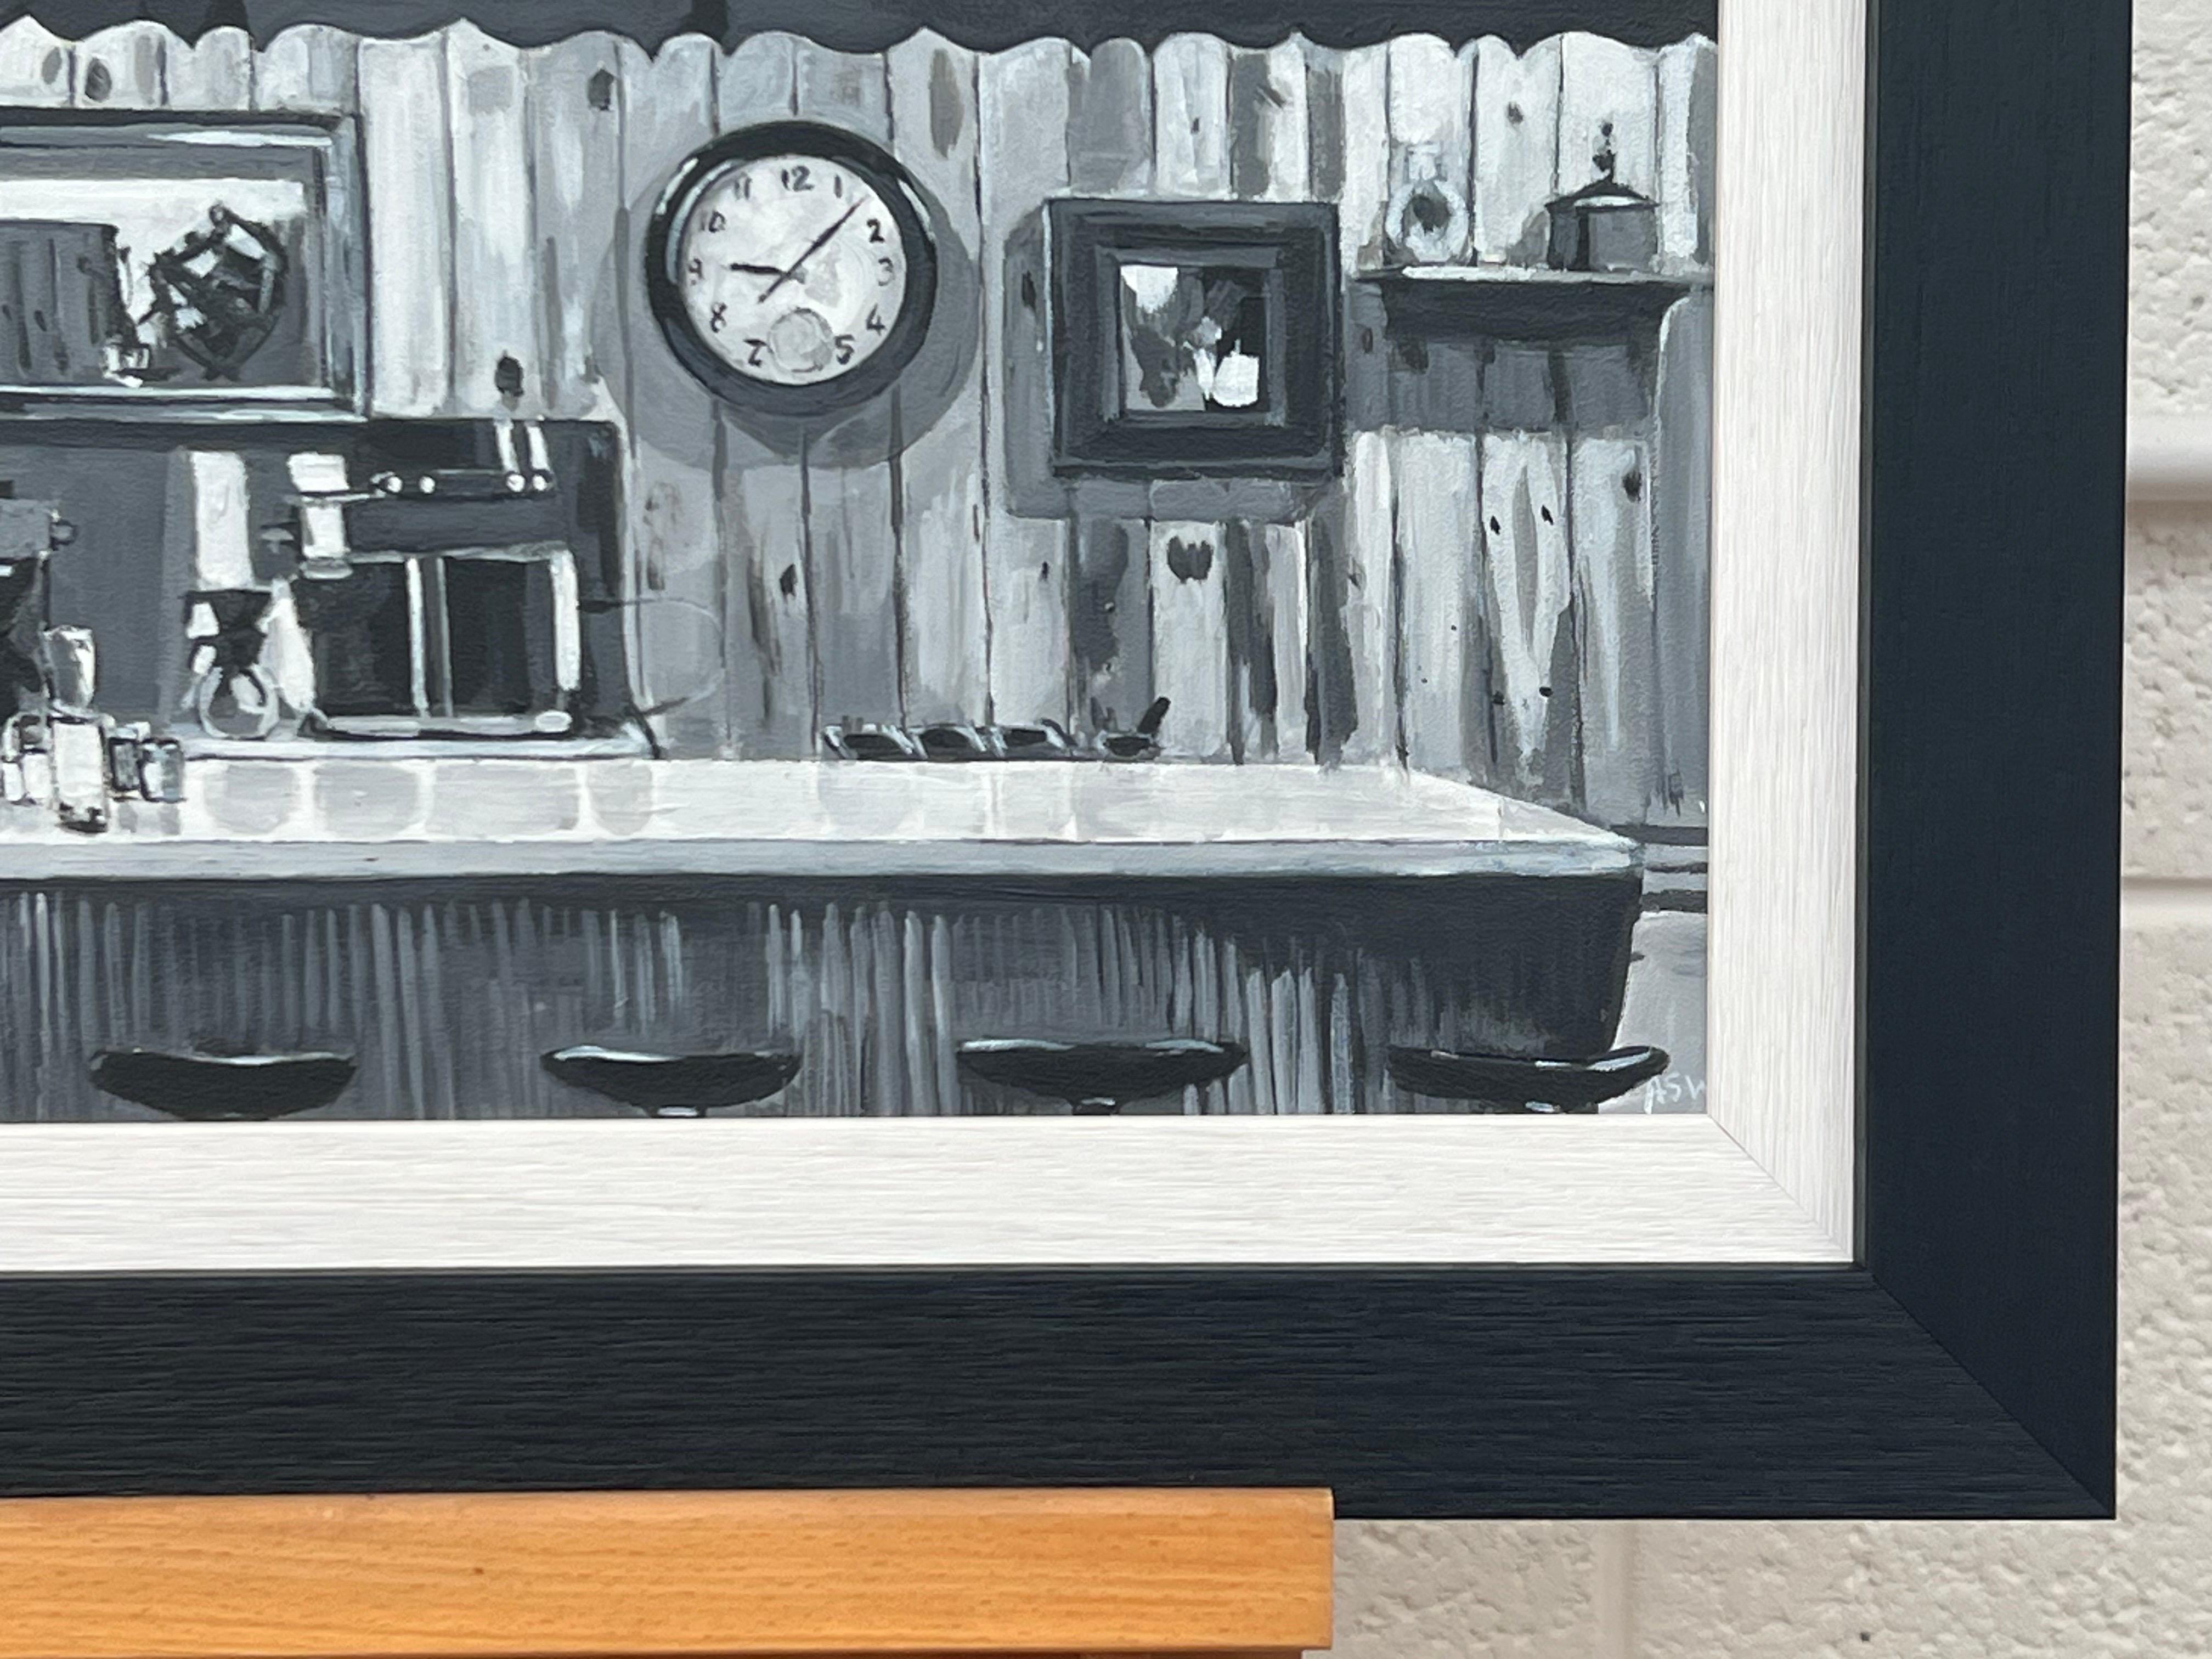 American Cowboy Diner Painting by British Contemporary Artist in Black & White 3